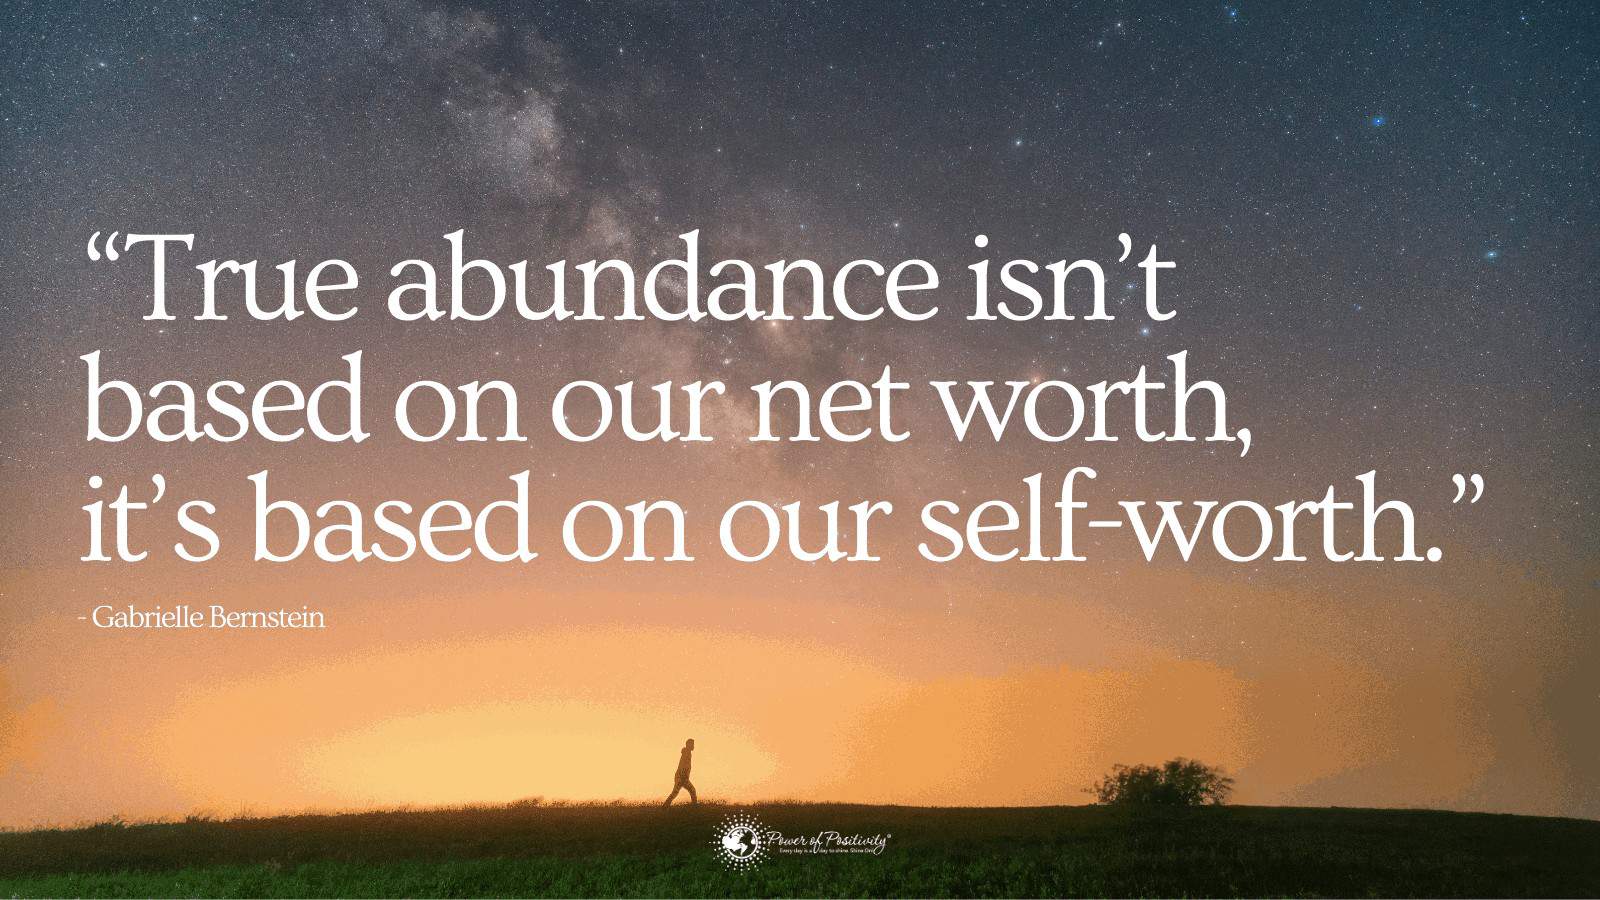 15 Positive Quotes for a Life of Abundance